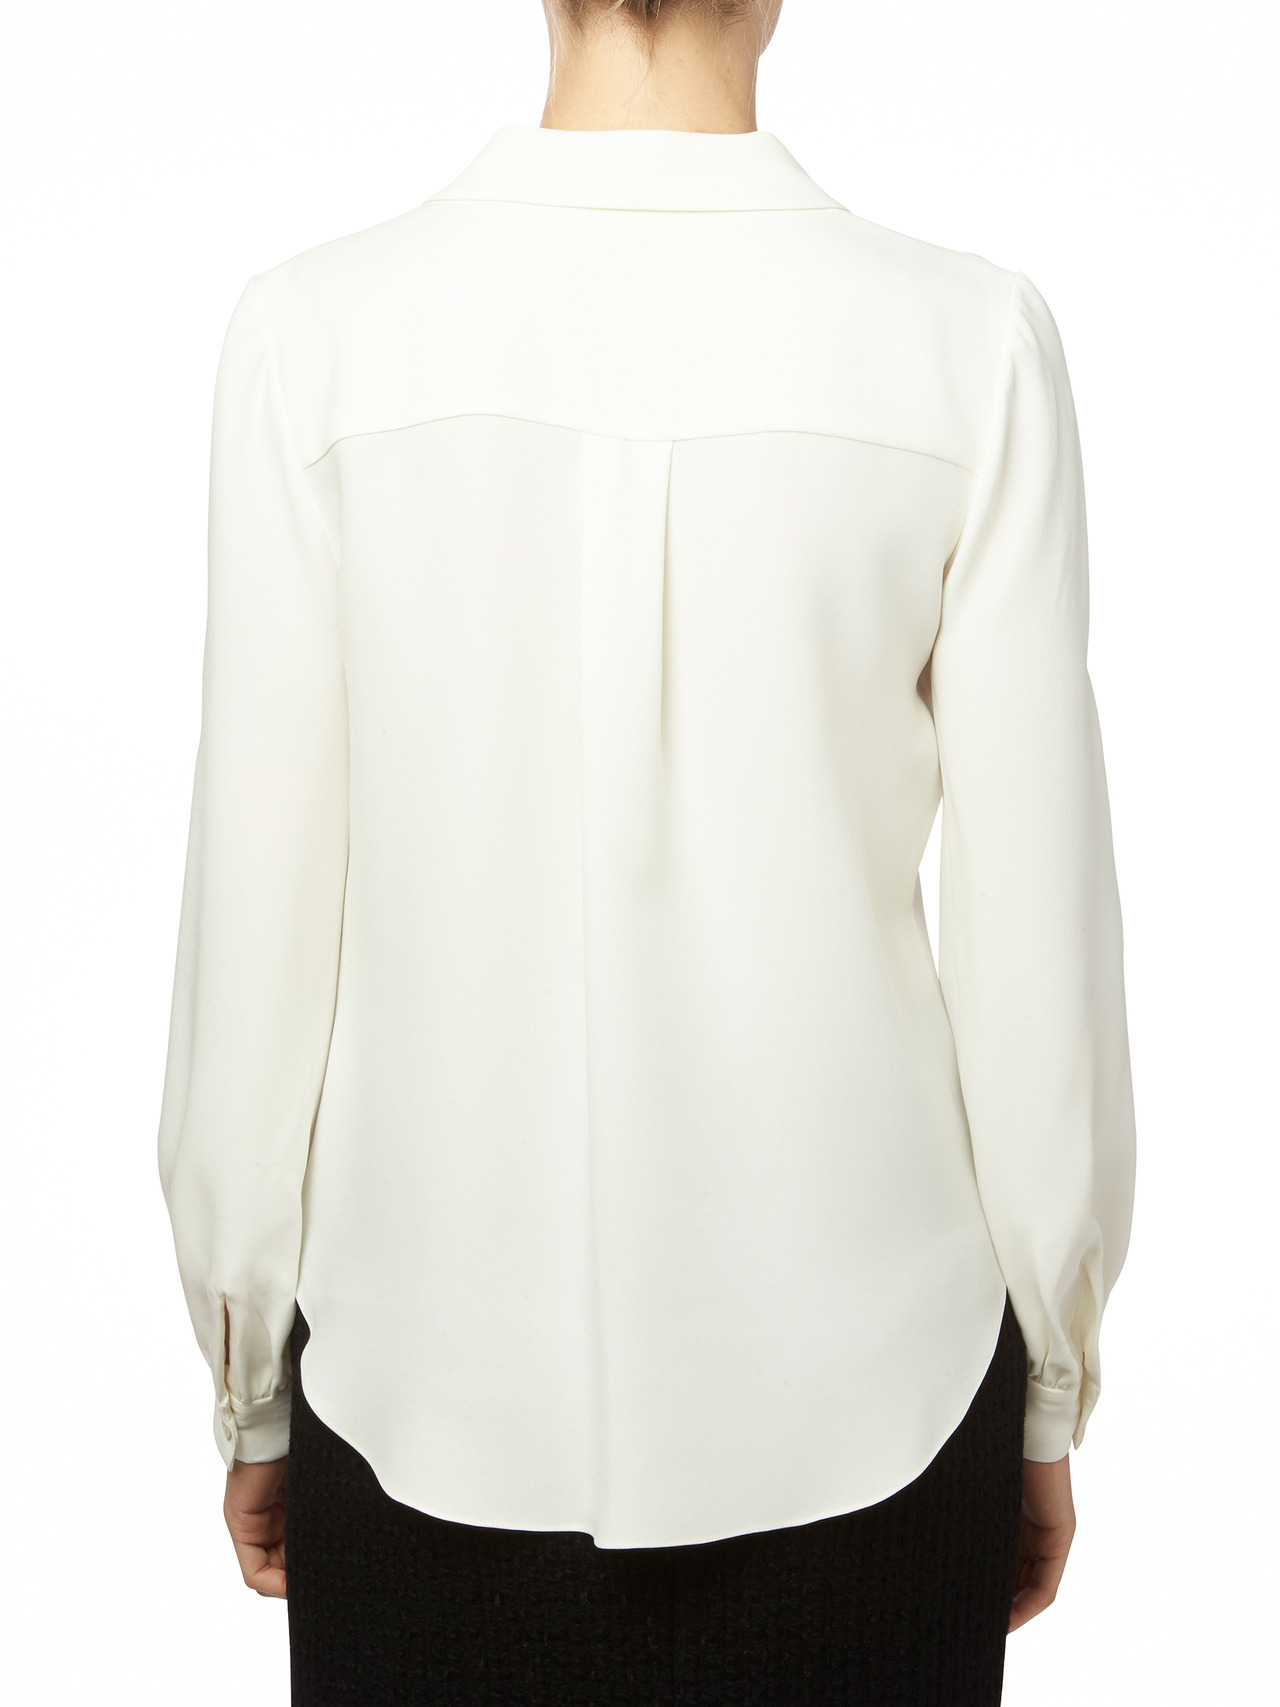 Lyst - Maiyet Shawl Collar Blouse in White